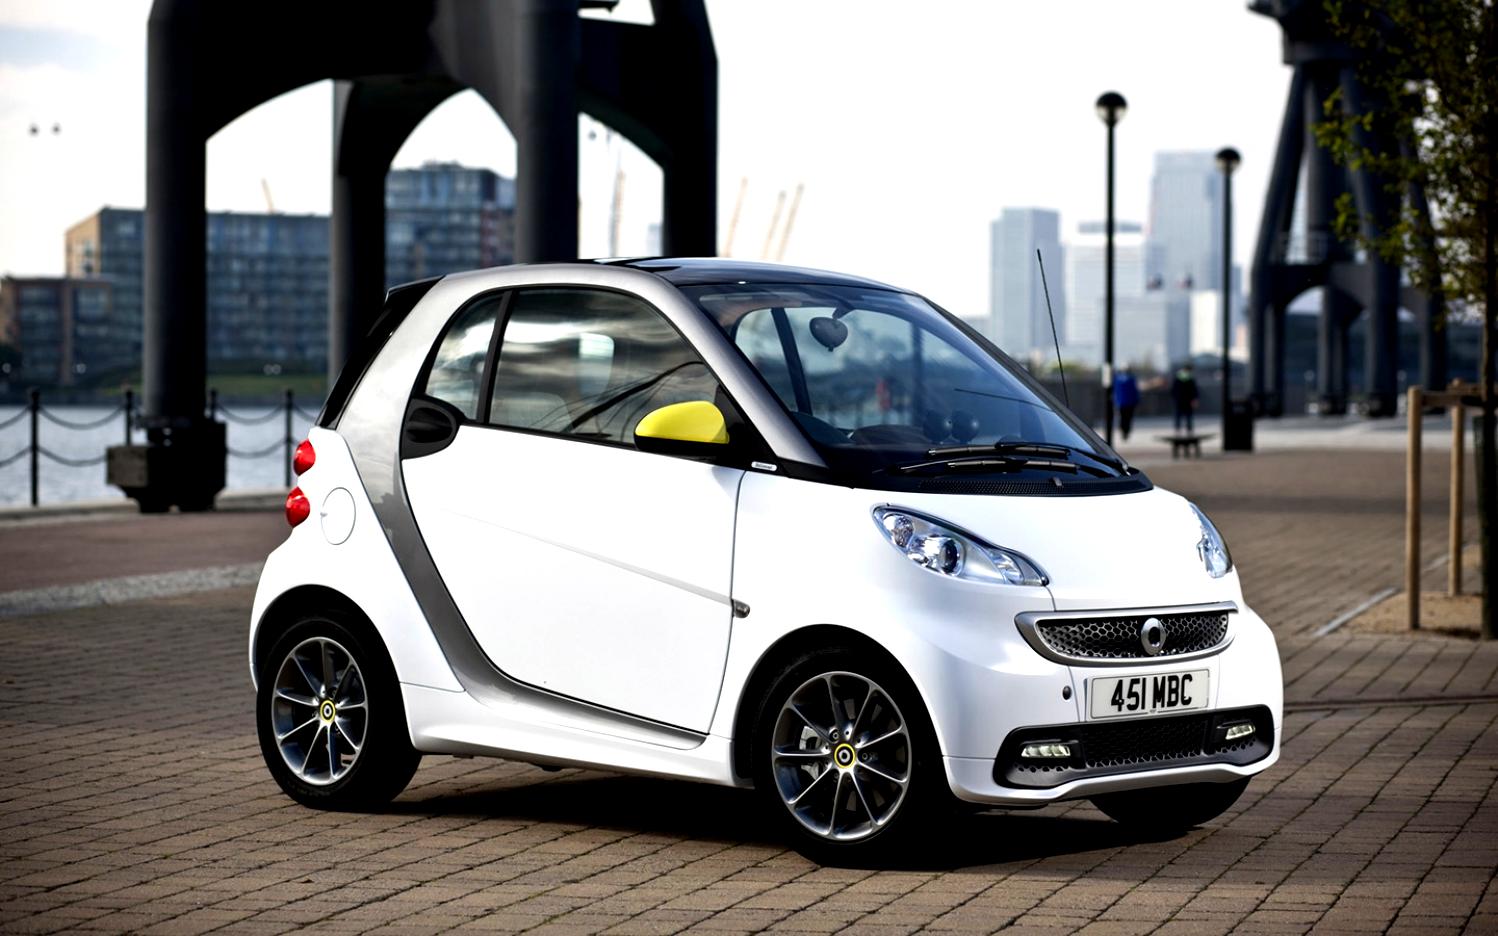 Smart Fortwo 2014 #90